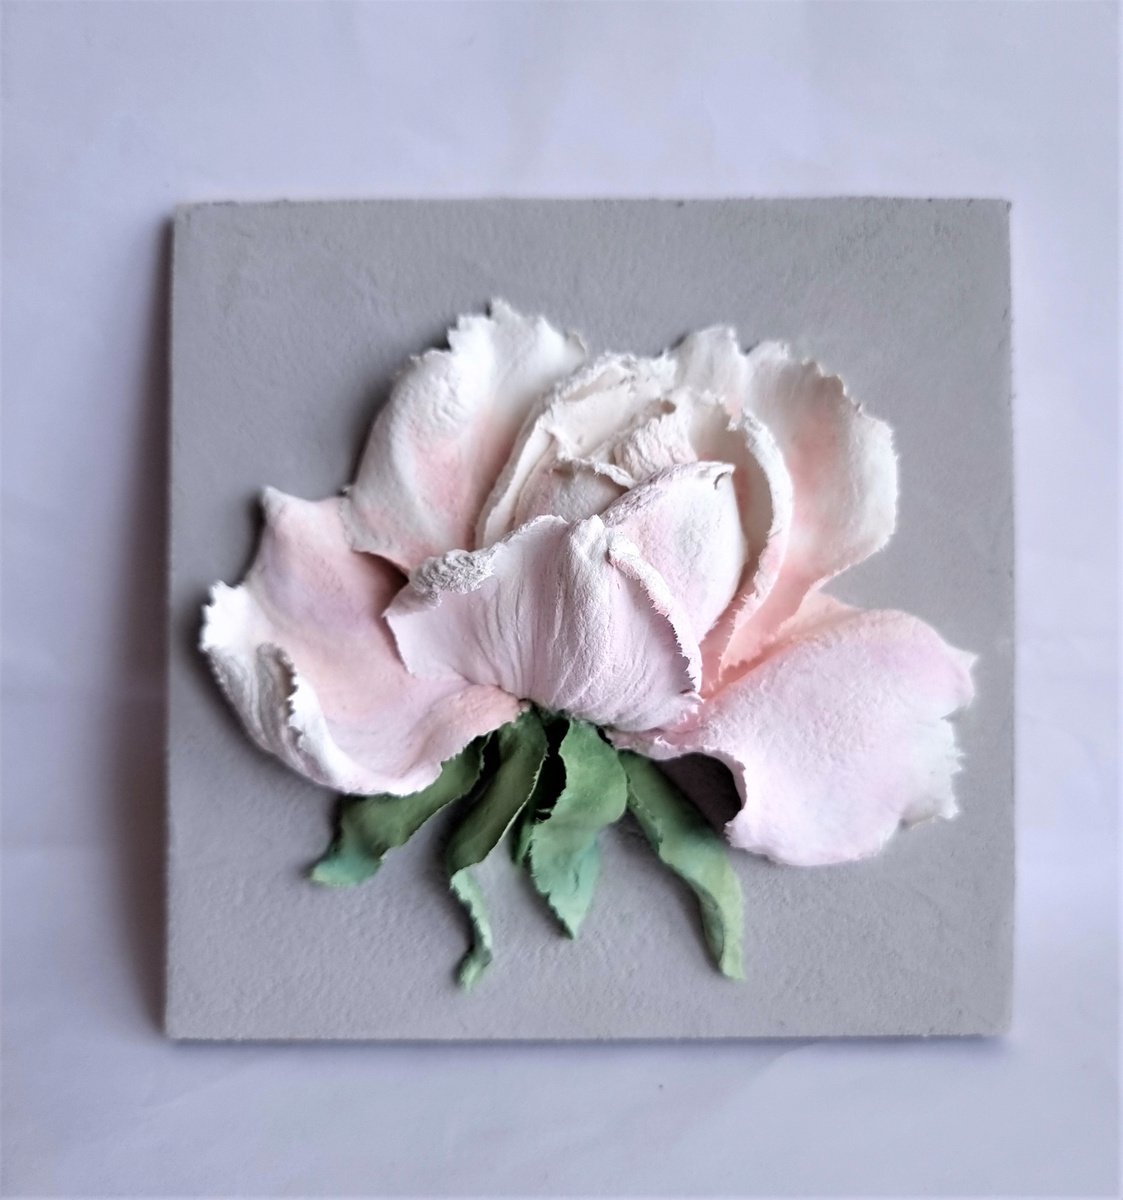 Relief flower painting with white-pink rose on a grey backgroud. The Rose #1. 13.5x13.5x4c... by Irina Stepanova